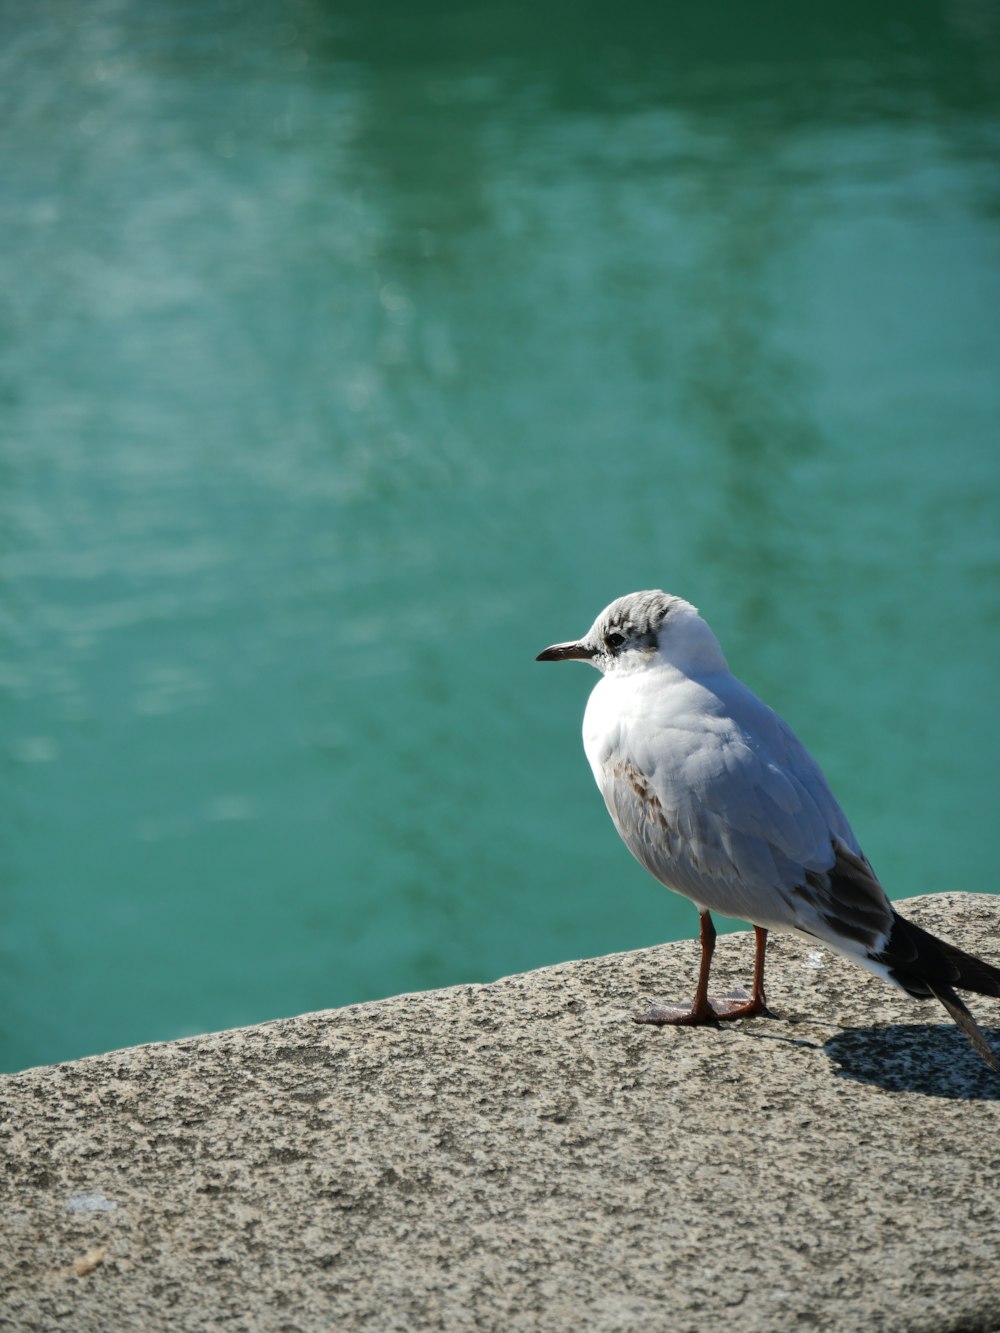 white and gray bird on gray concrete surface near body of water during daytime